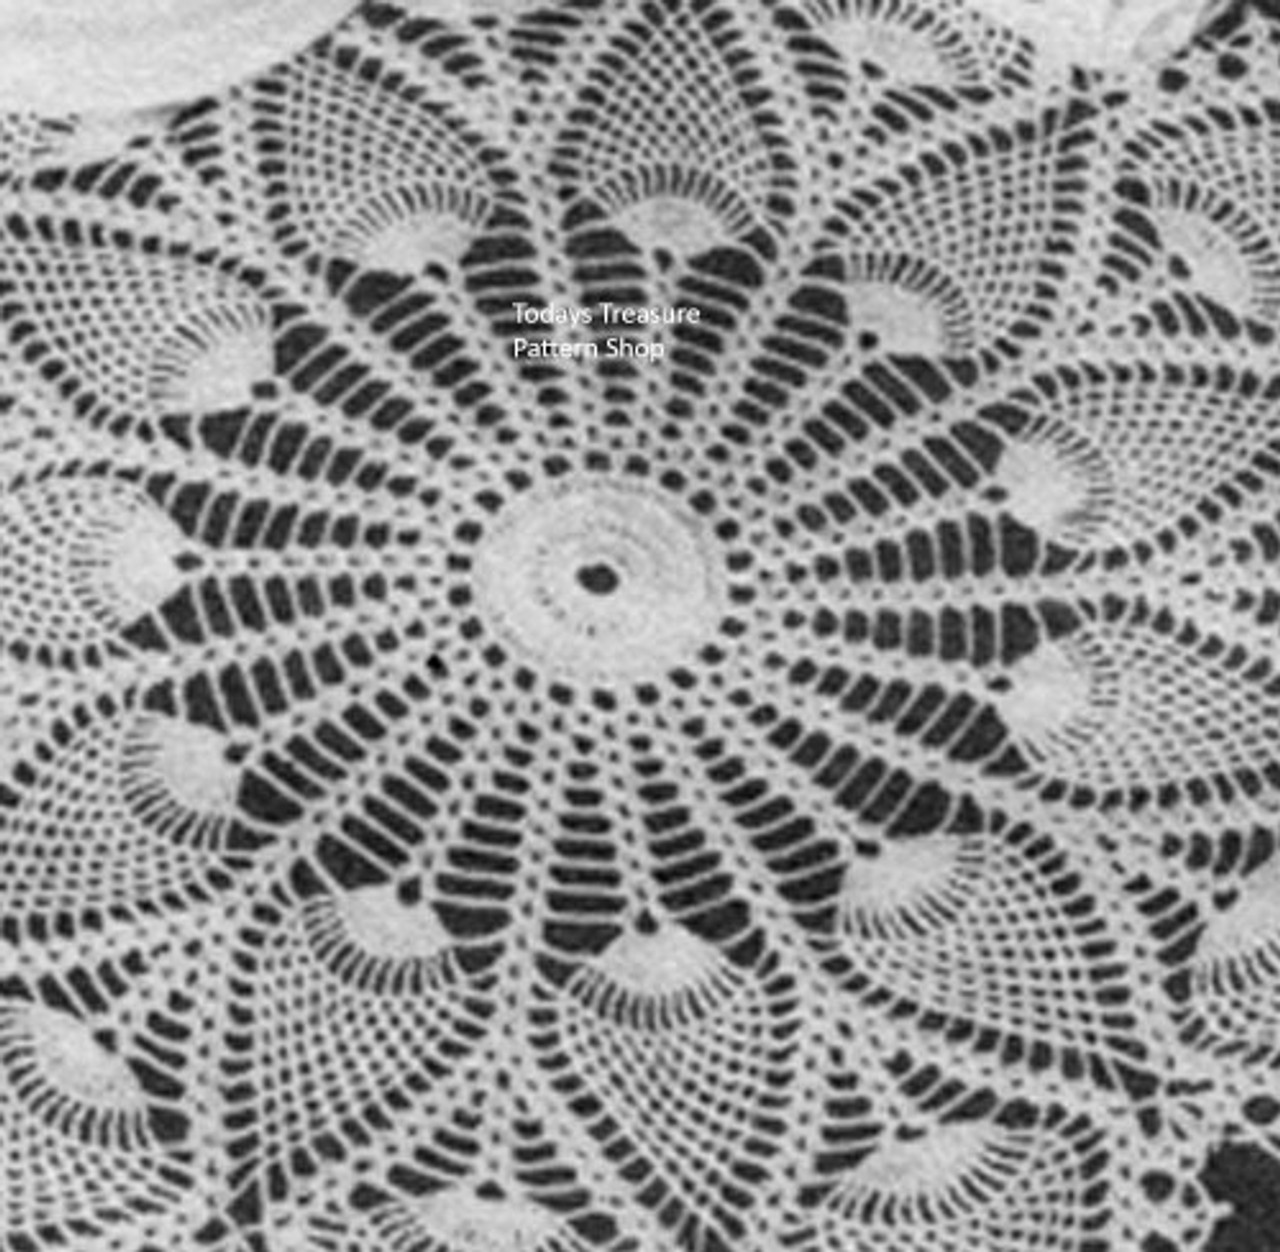 Large Wheel Crocheted Doily pattern, Vintage 1940s